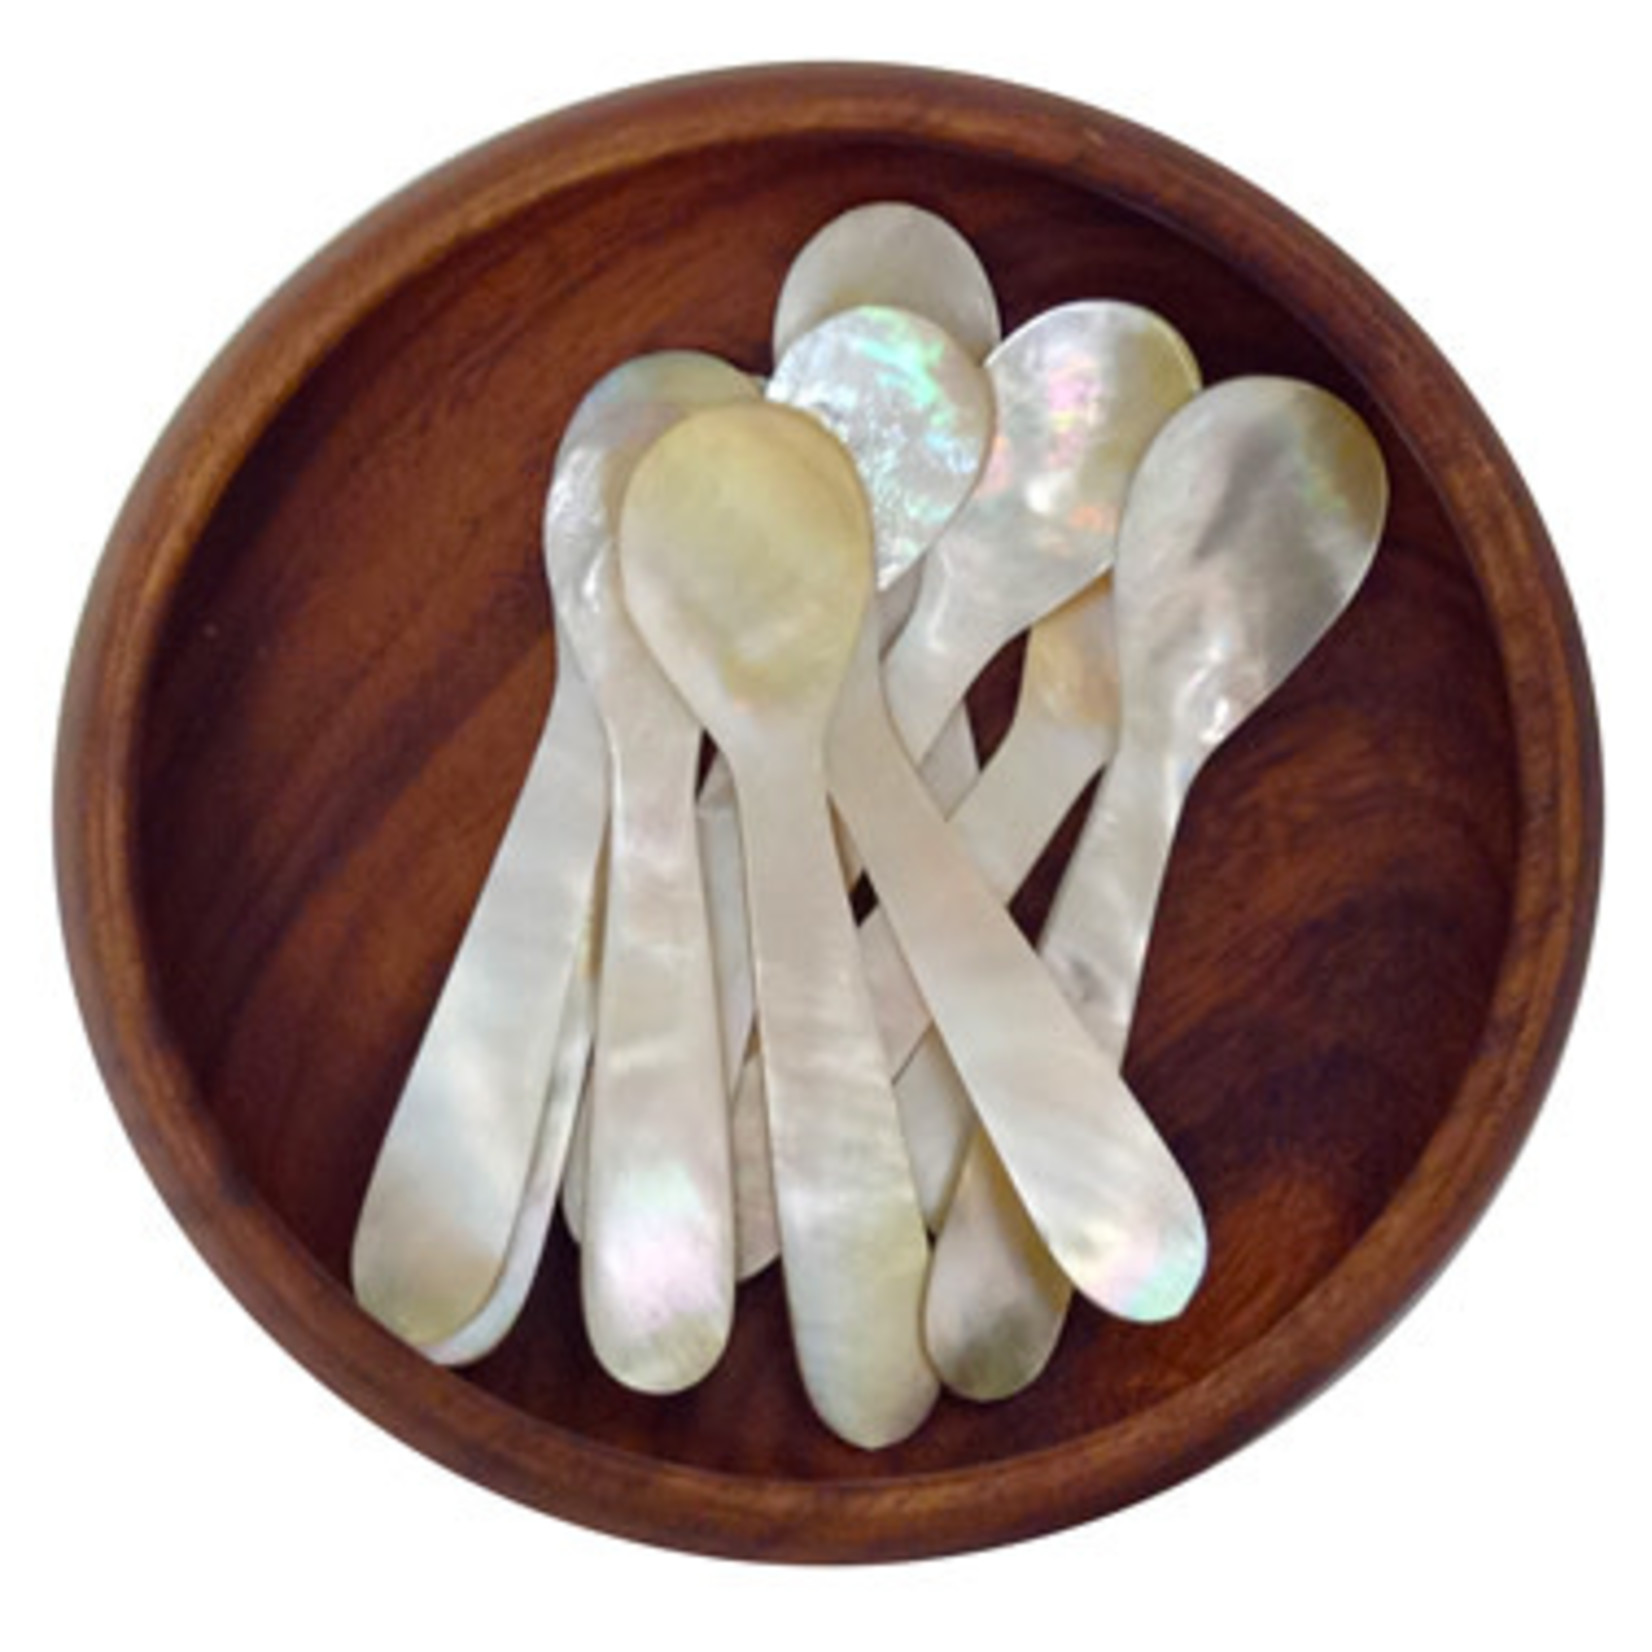 Spoon # 11 Mother of Pearl Spoons, Set of 10